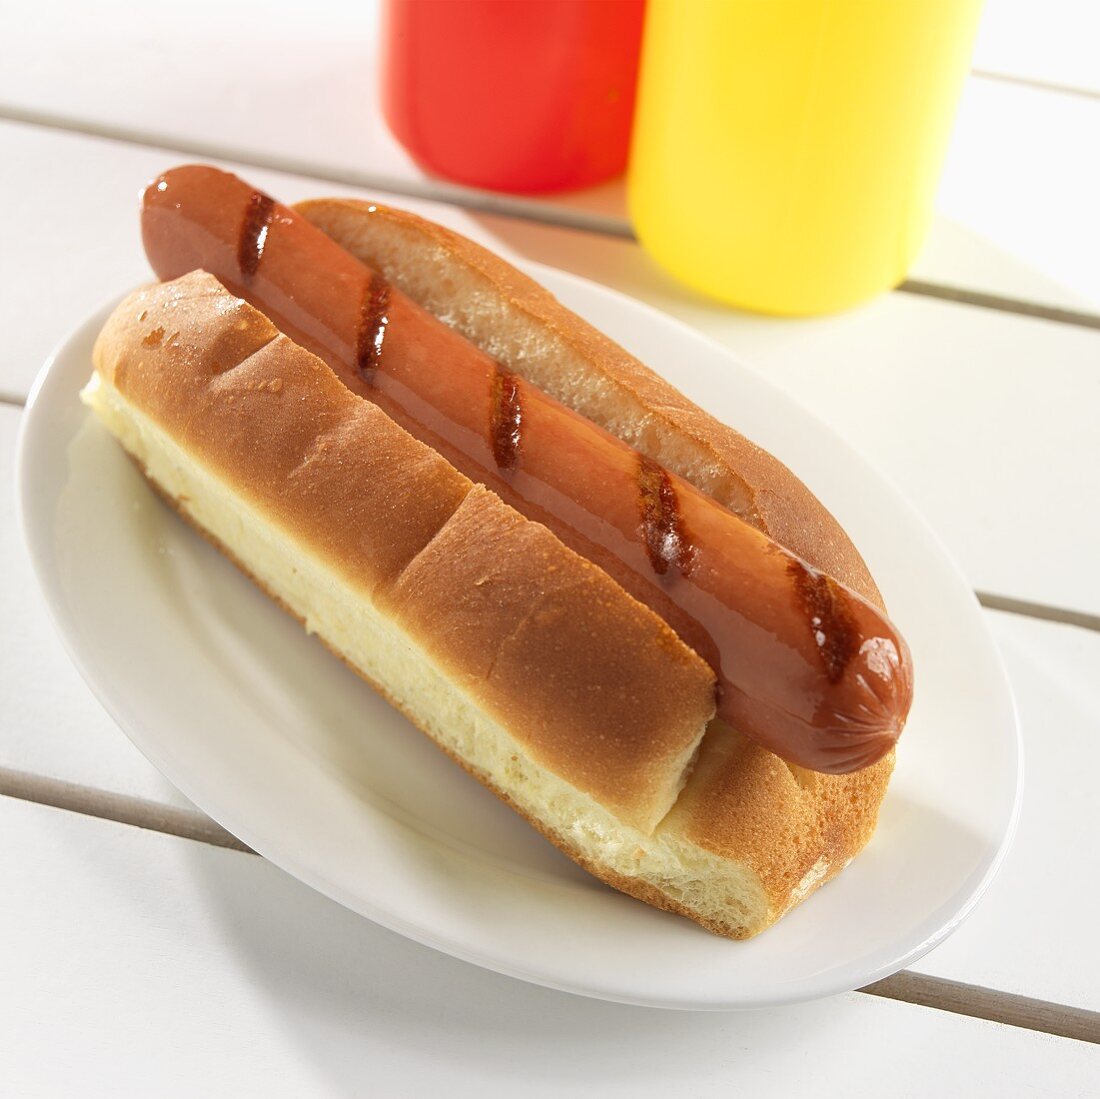 Grilled Hot Dog in a Bun; Plain; Ketchup and Mustard Bottles